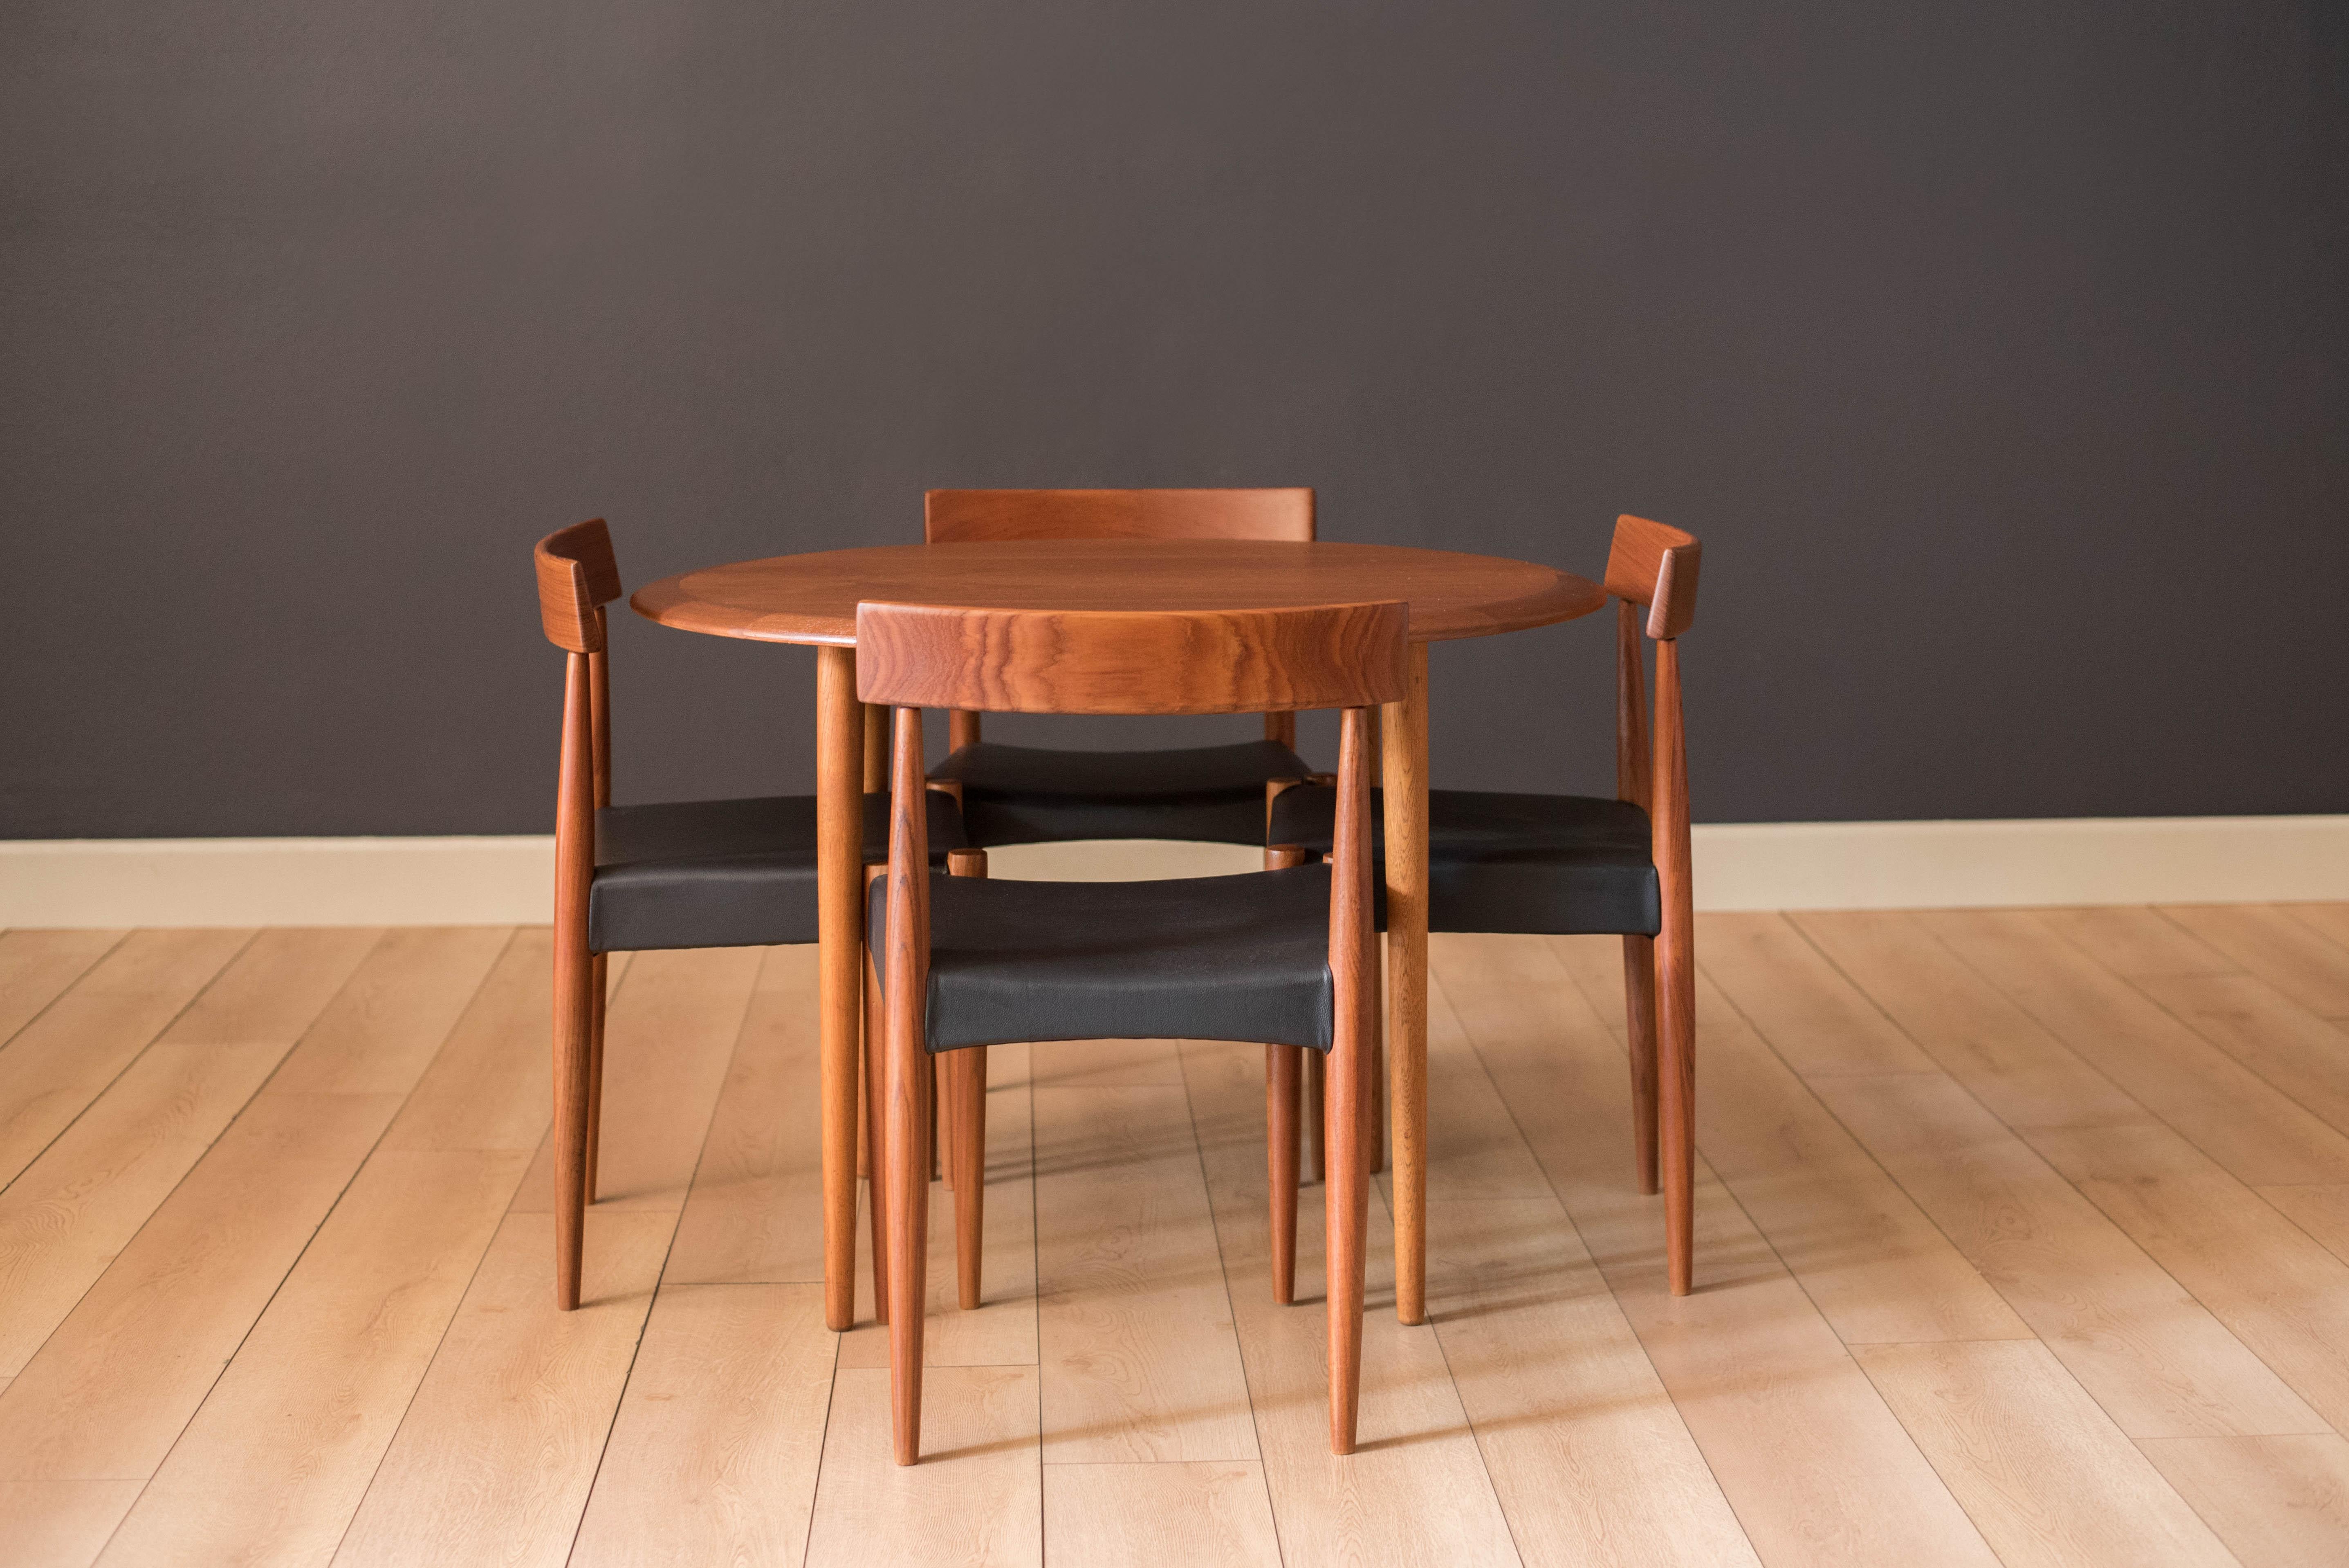 Mid-Century Modern teak dining chairs designed by Arne Hovmand-Olsen for Mogens Kold, Denmark. Each chair features a curved paddle backrest and sculptural supporting legs. This set has been newly reupholstered in black vinyl. Price is for the set of